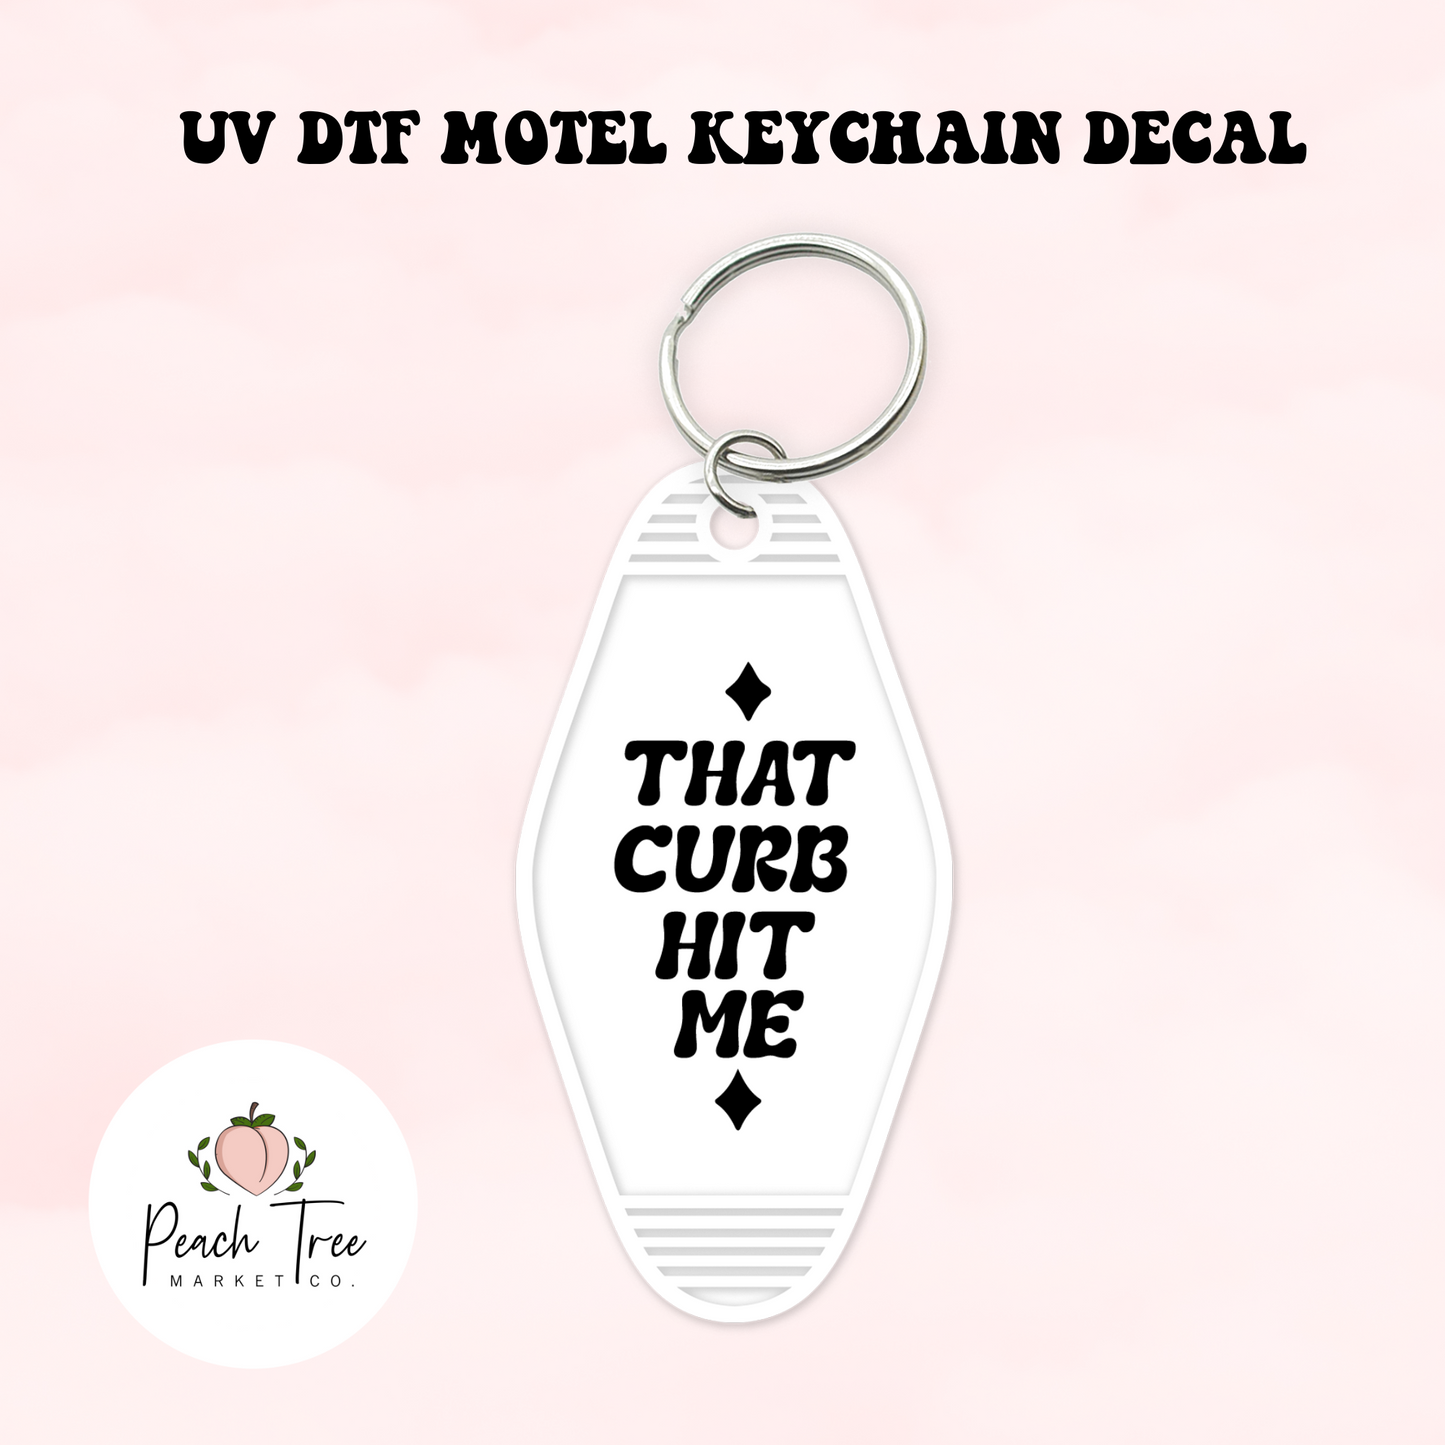 That Curb Hit Me UV DTF Motel Keychain Decal